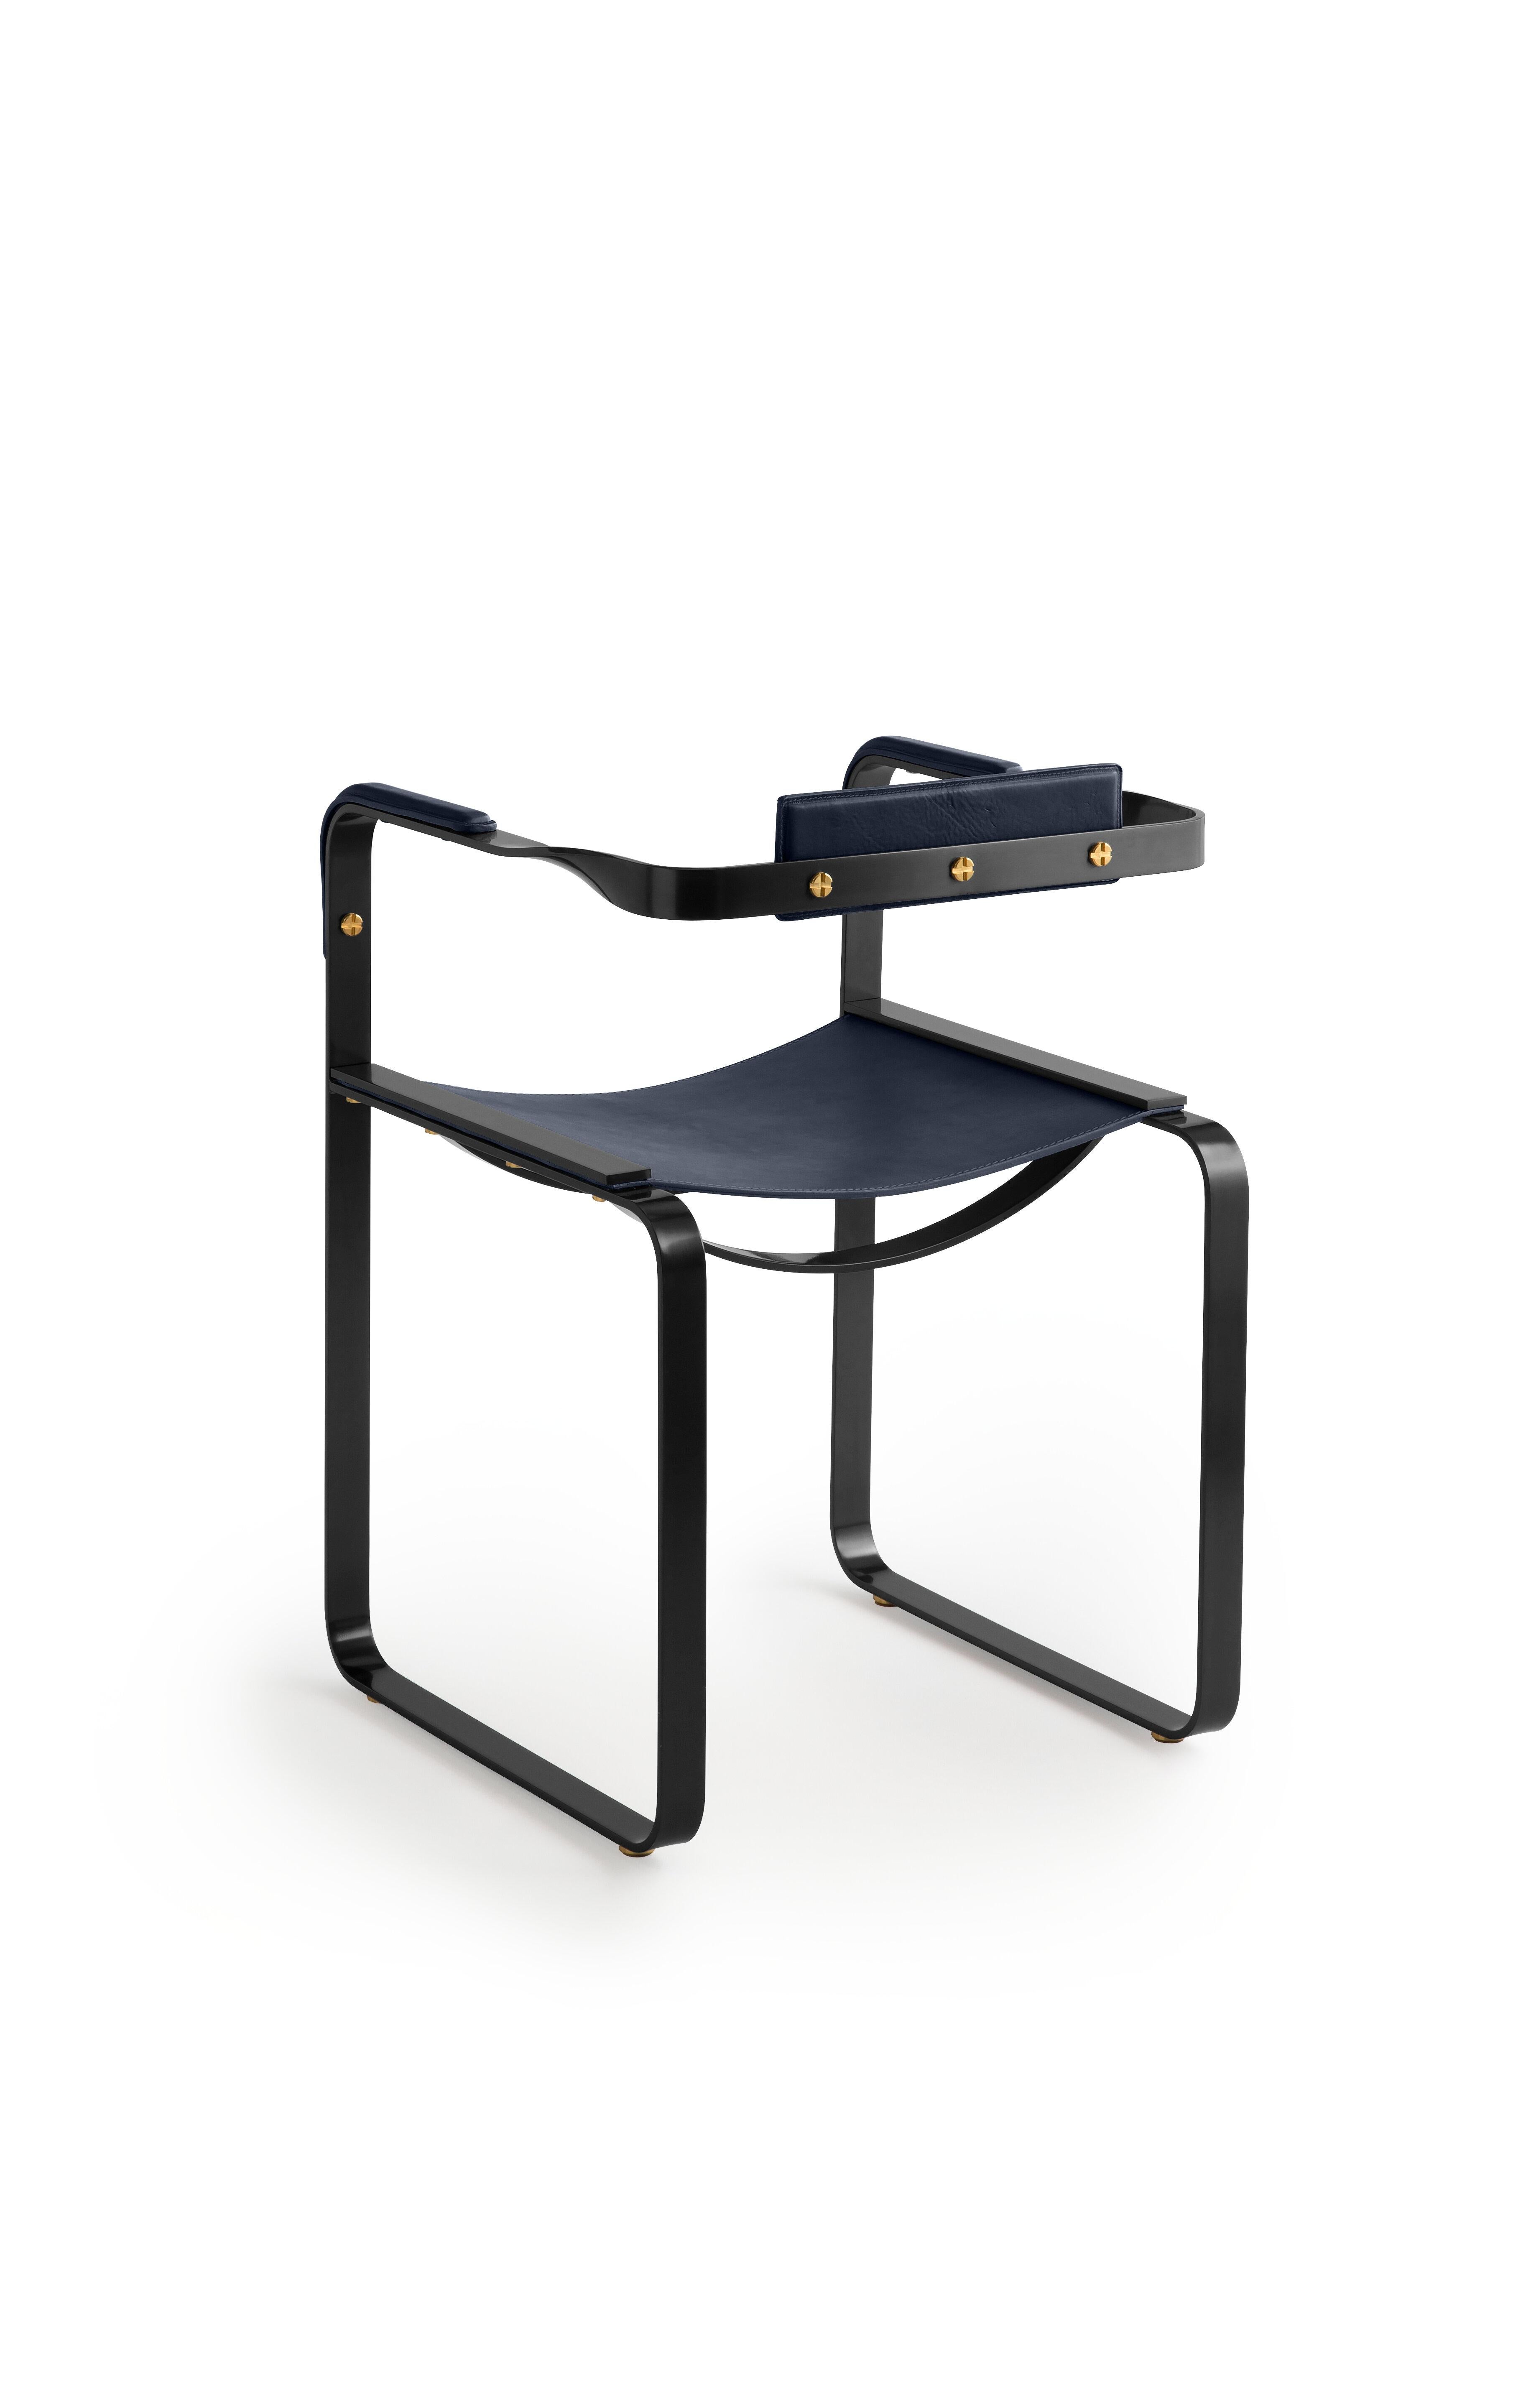 Spanish Set of 2 Armchair, Black Smoke Steel & Blue Navy Saddle, Contemporary Style For Sale